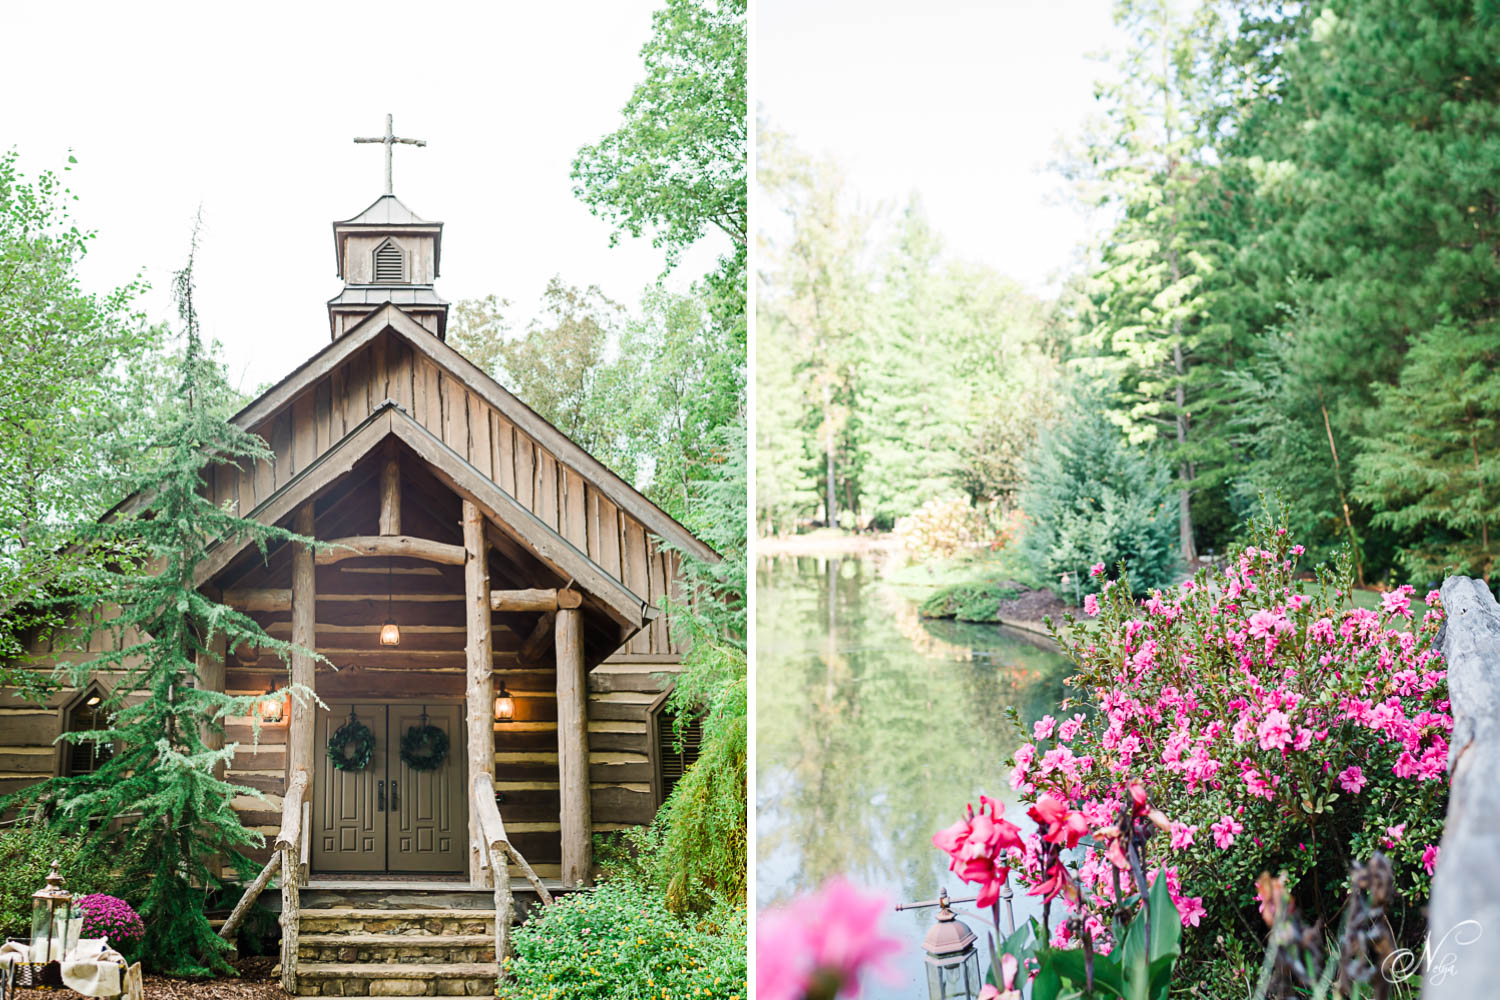 The chapel at Indigo falls. And pink flowers blooming in October along the upper pond.